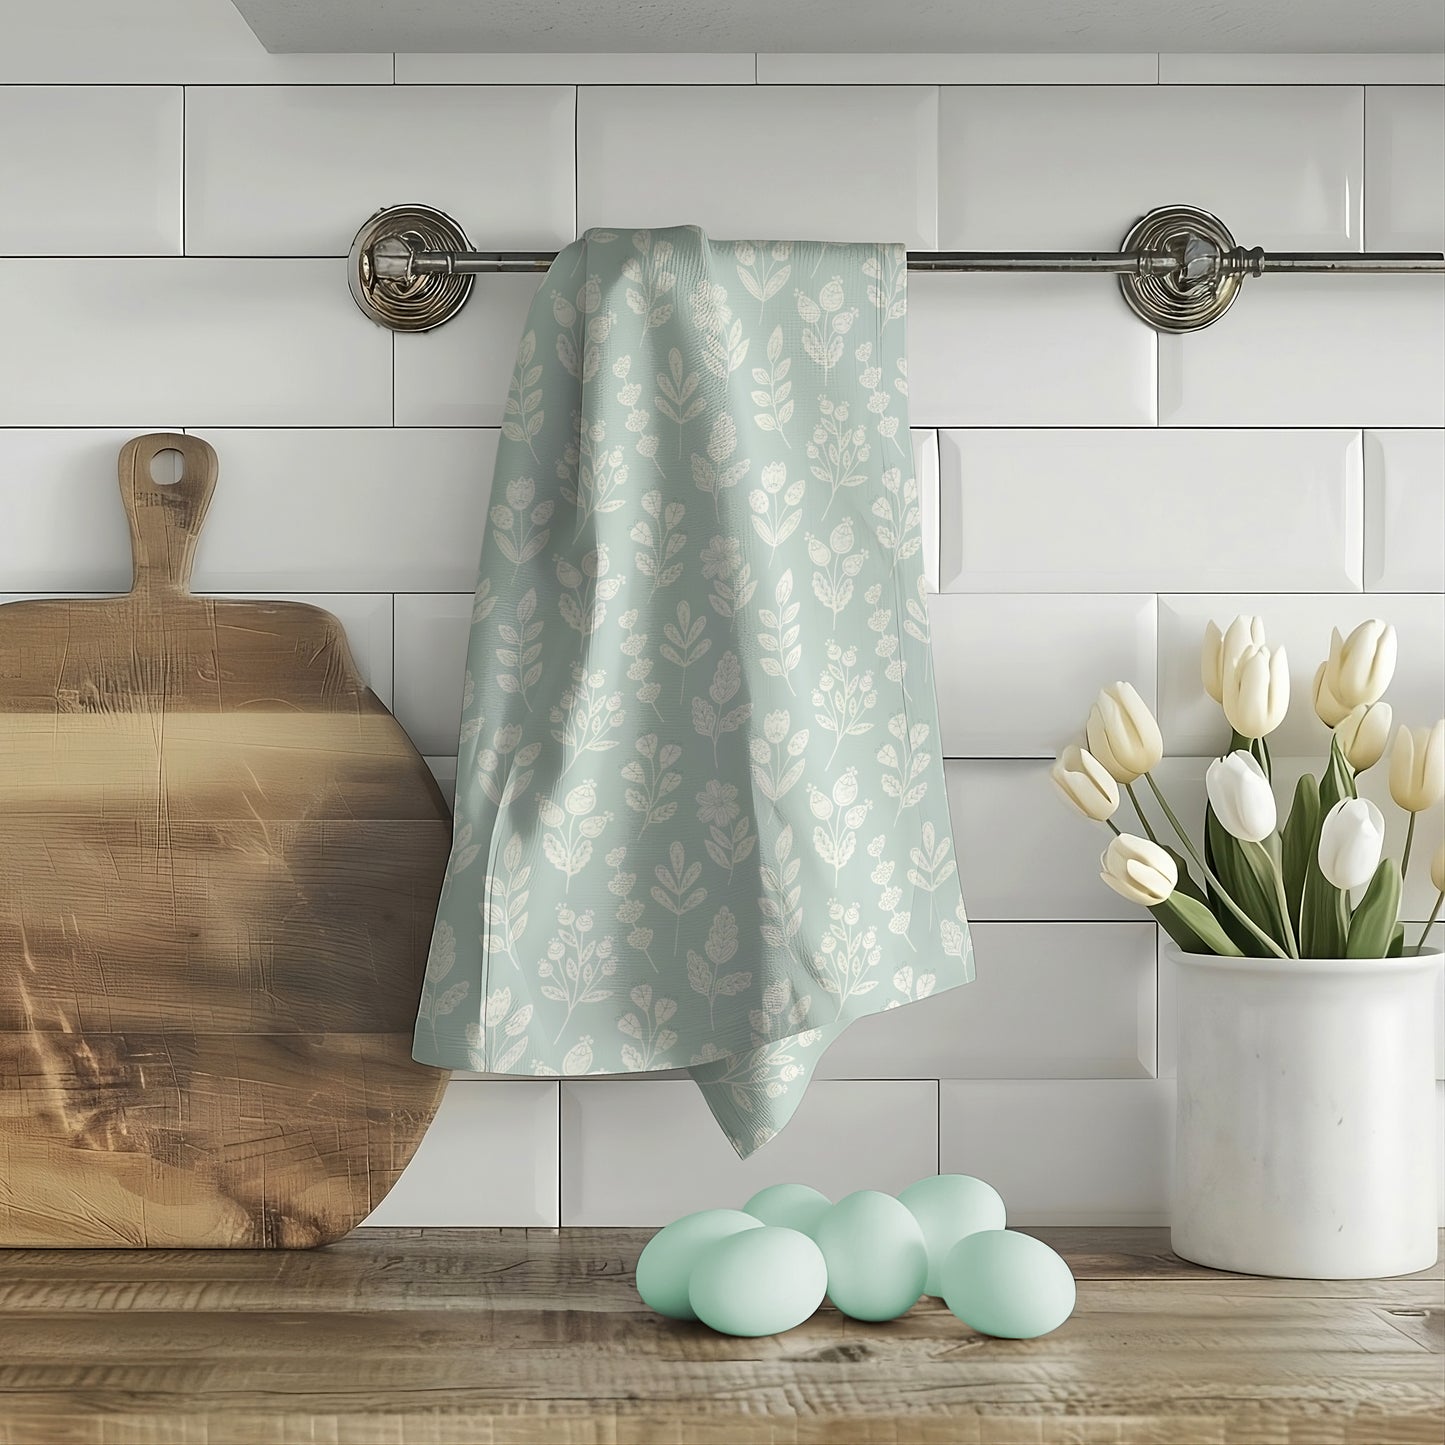 Tea towel with eggs mockup – perfect for Easter, spring & everyday designs